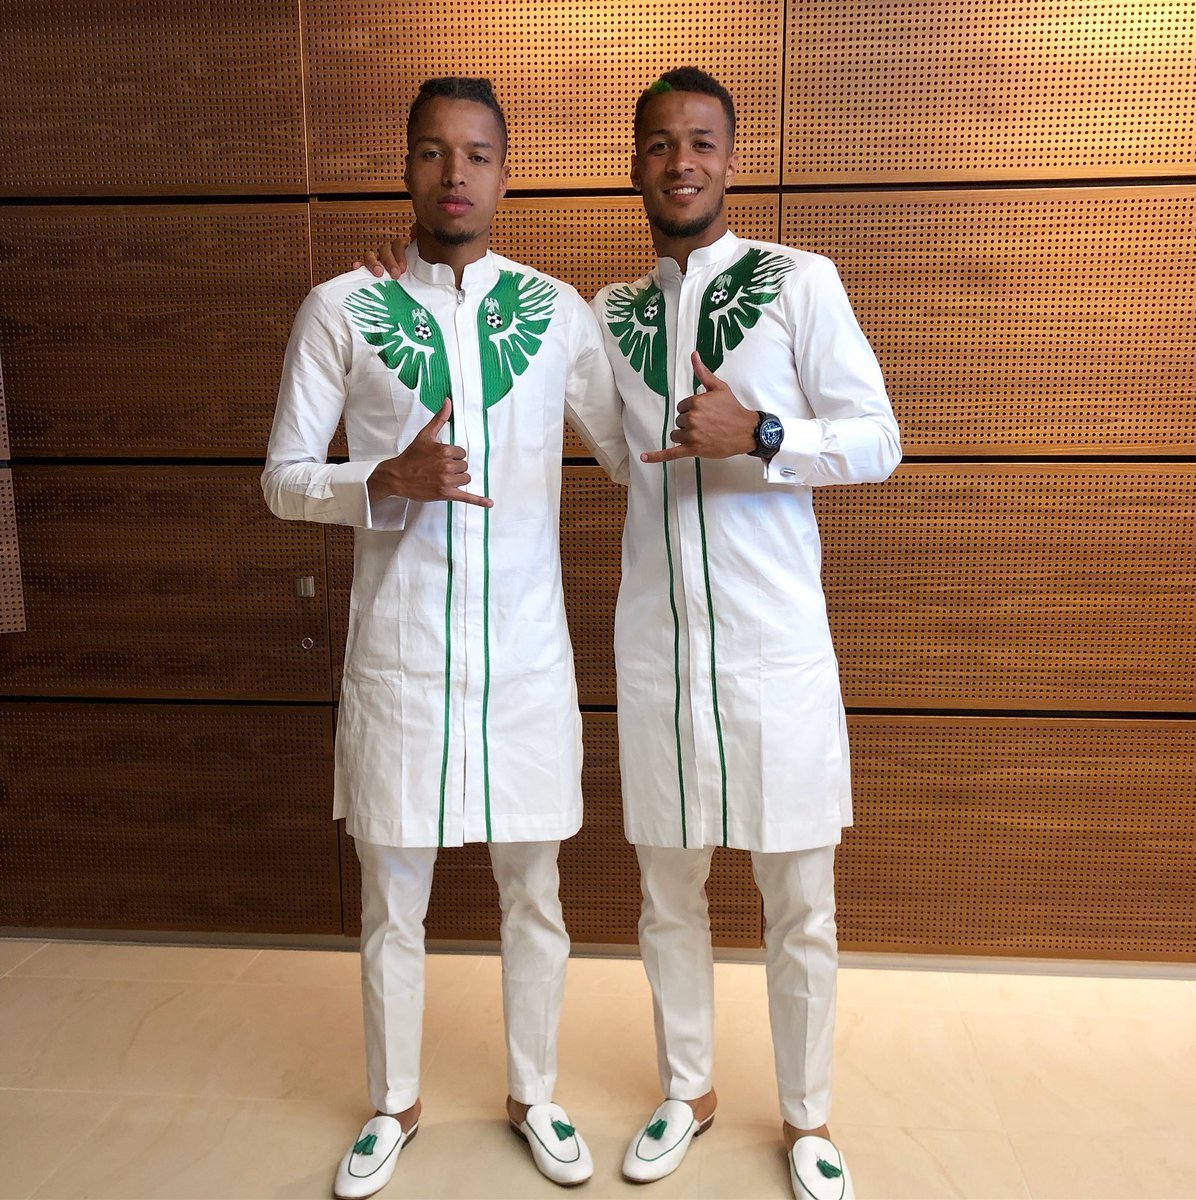 Super Eagles en route to Russia rocking matching green and white regalia